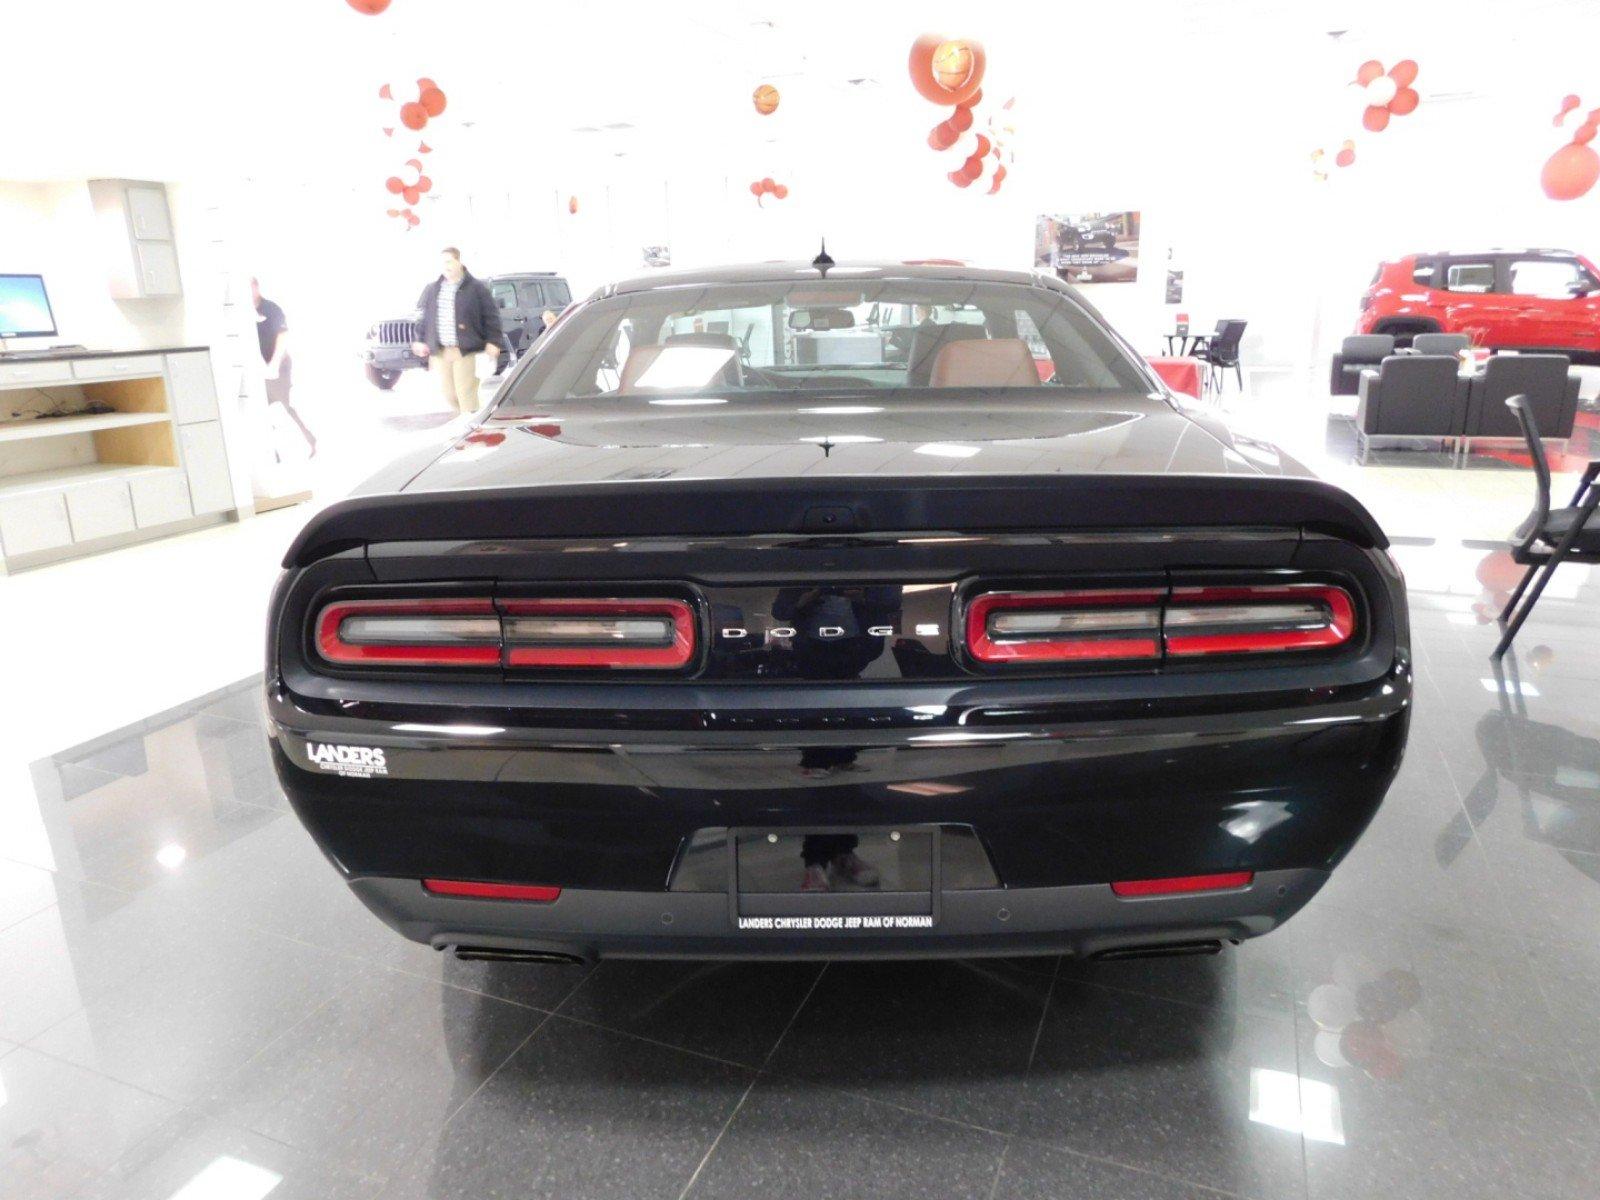 New 2019 DODGE Challenger SRT Hellcat Coupe in Norman #KH513256